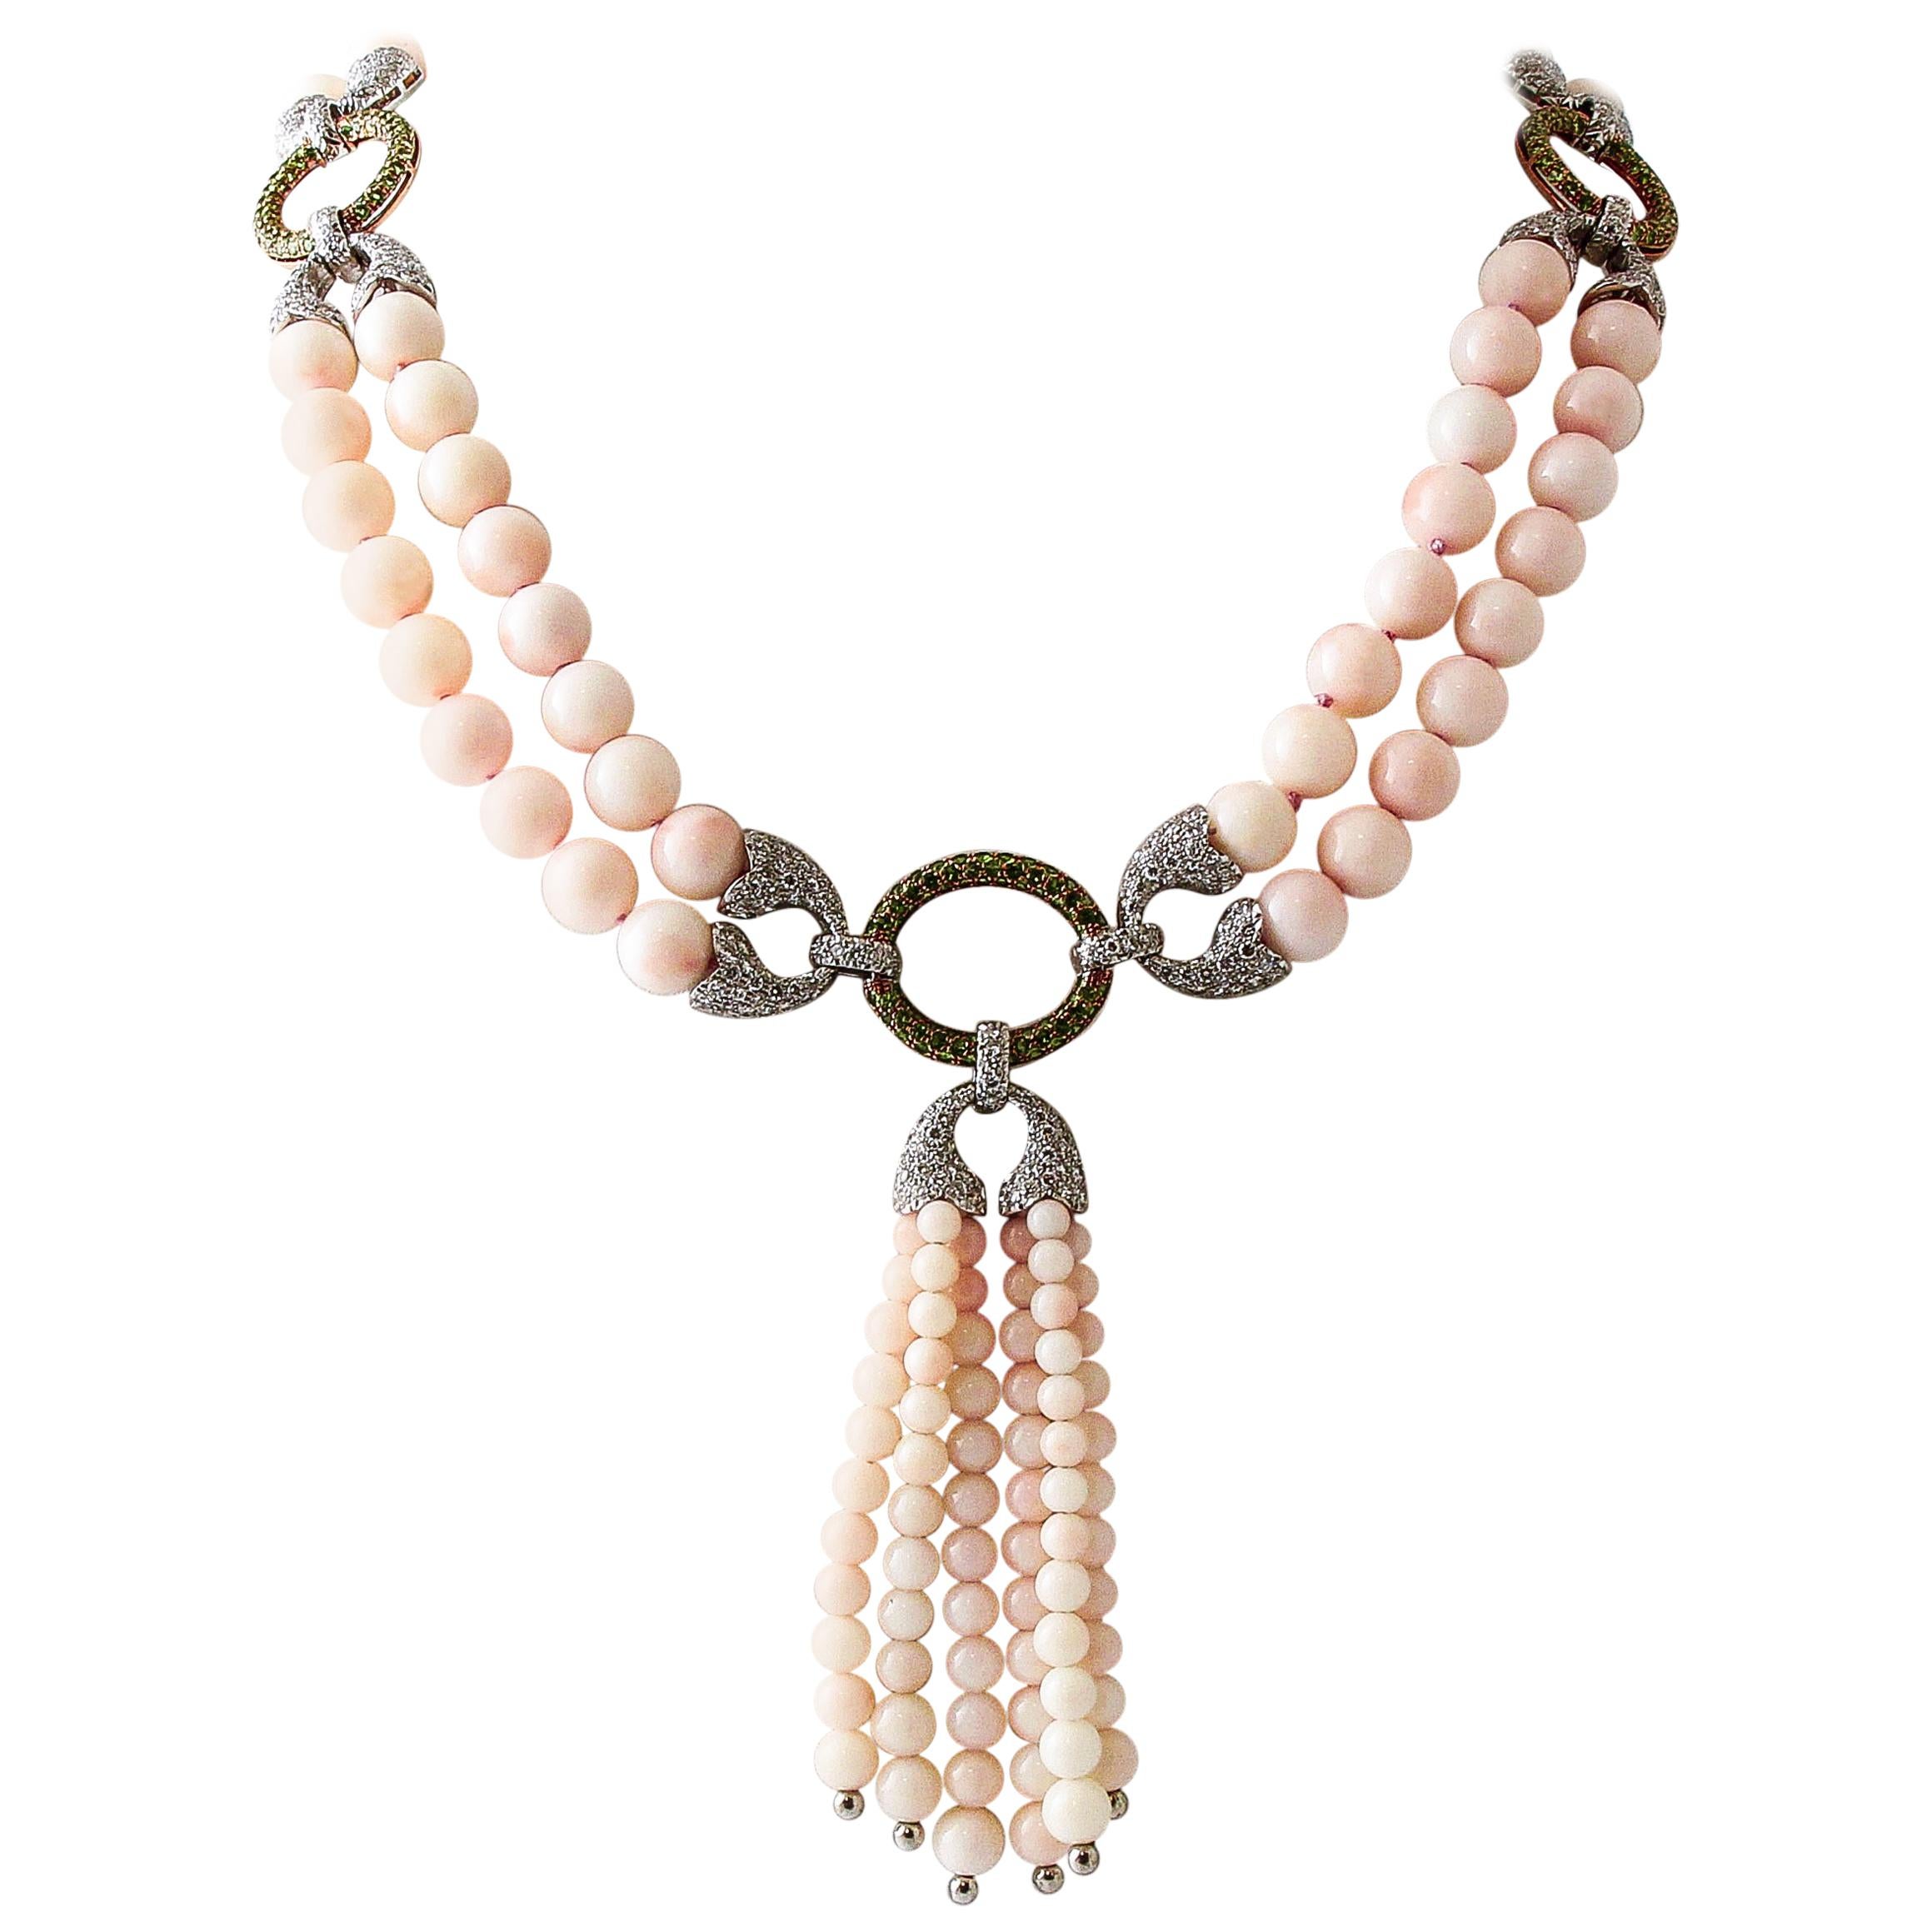 Diamonds, Tsavorites, Pink Coral Spheres, White and Rose Gold Beaded Necklace